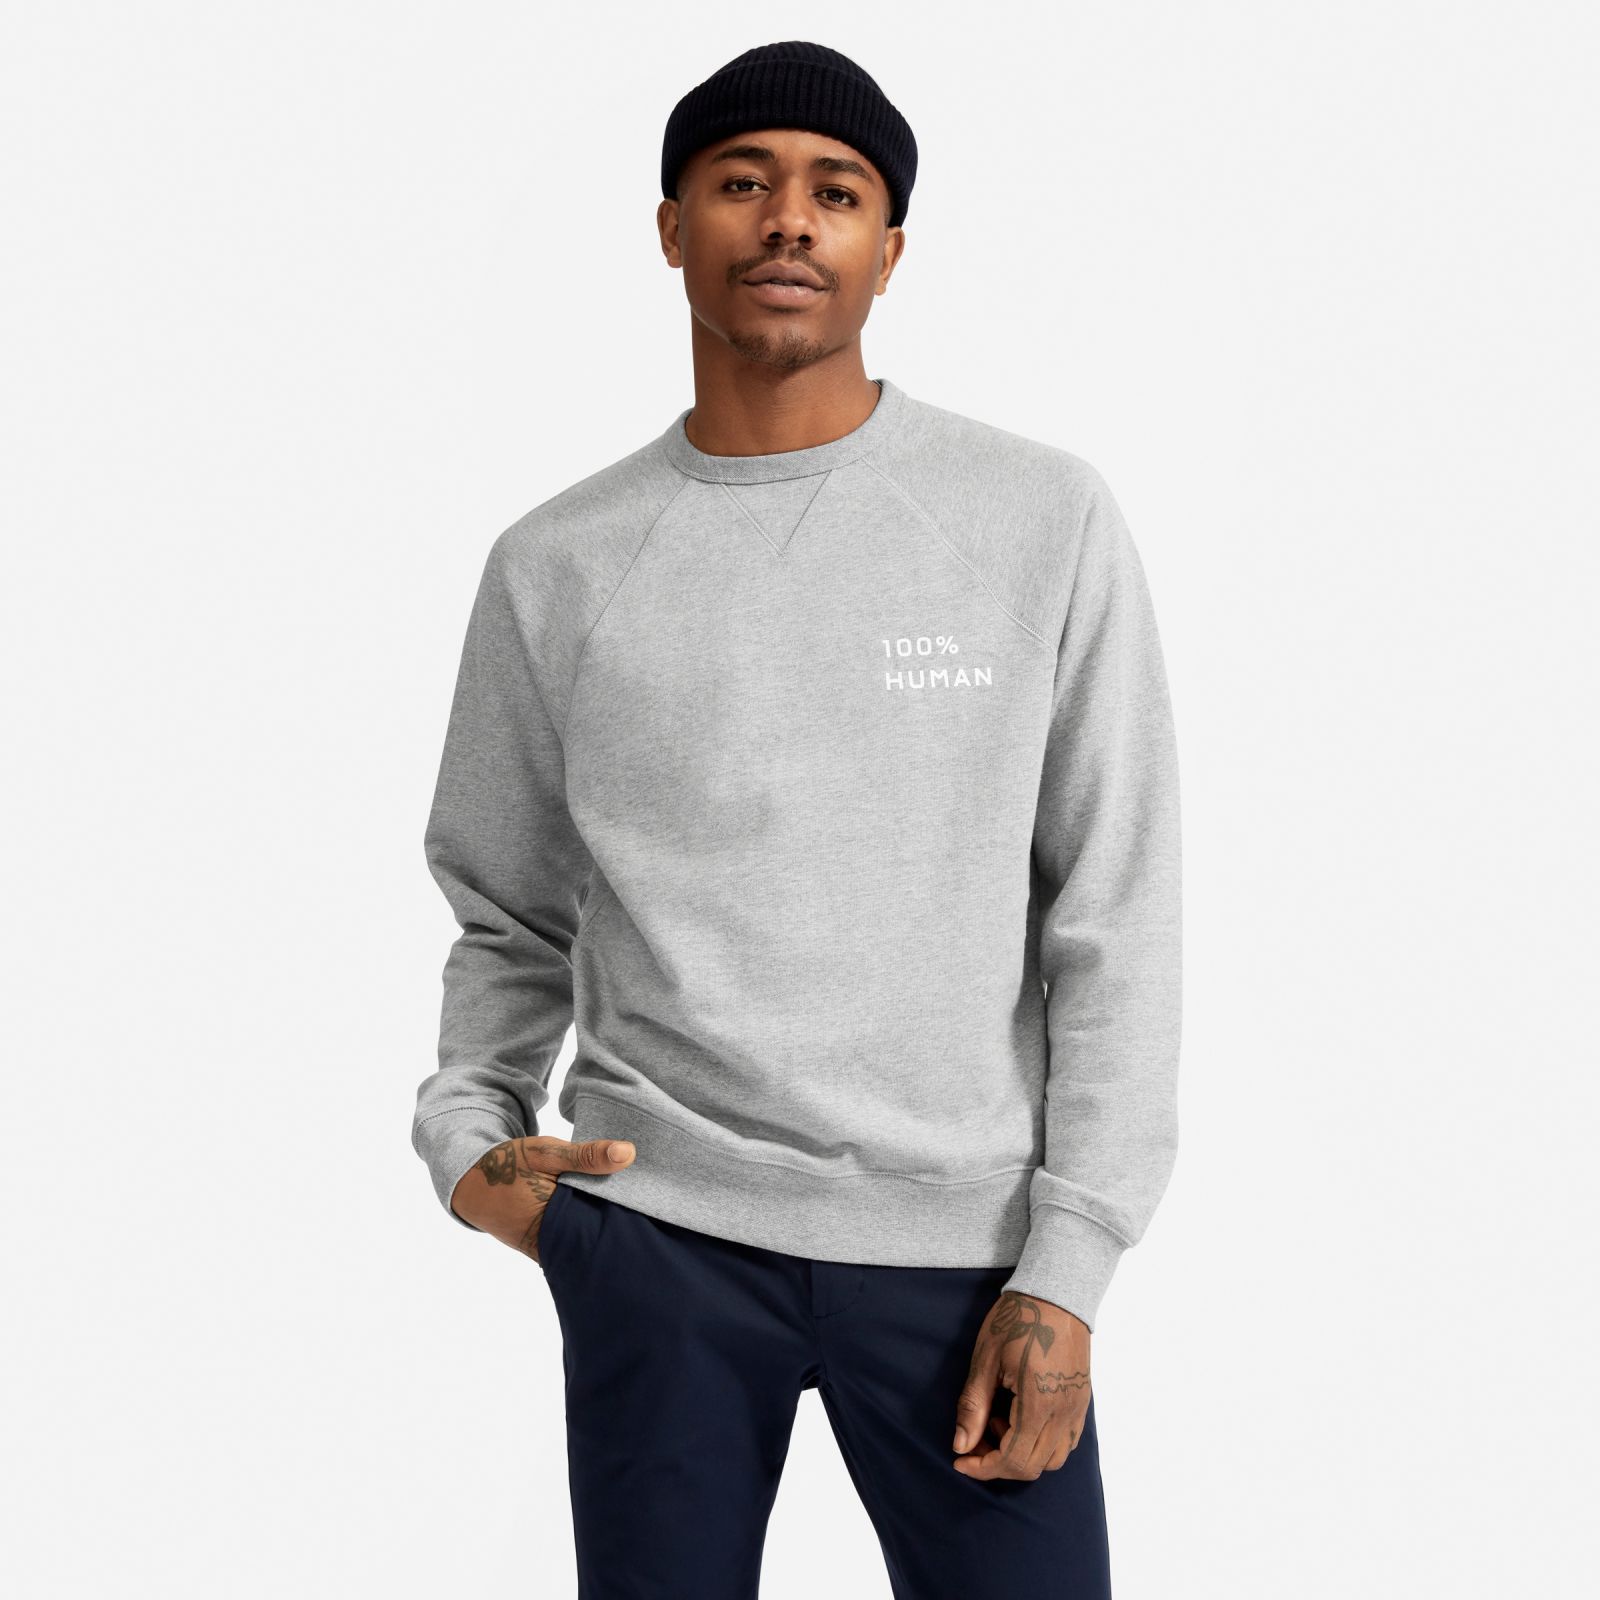 Women's 100% Human Unisex French Terry Sweatshirt in Small Print by Everlane in Heather Grey, Size XS | Everlane